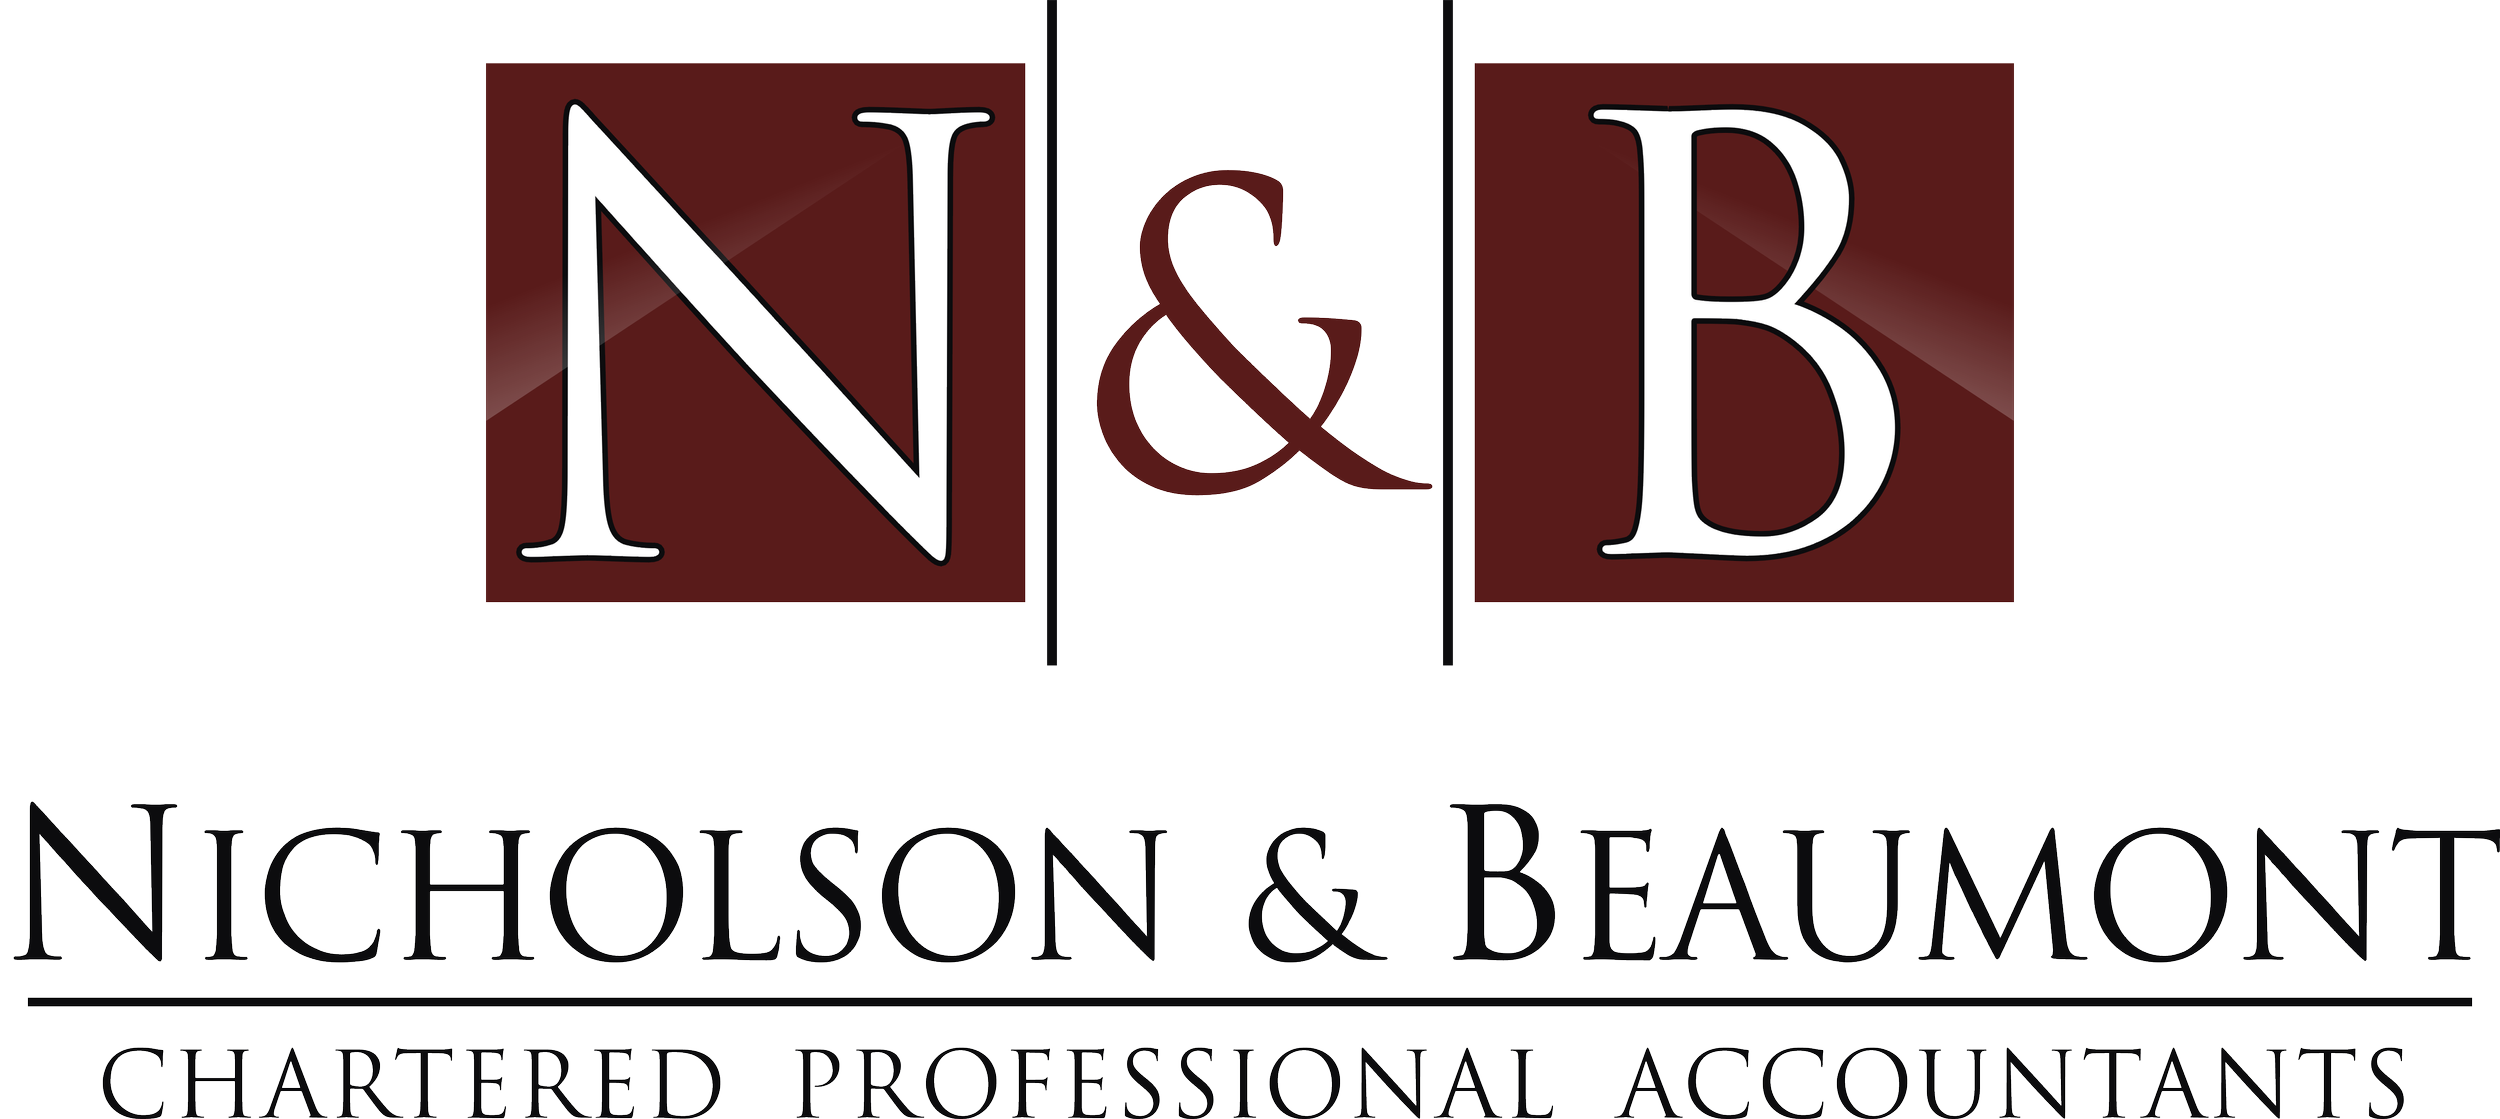 Nicholson & Beaumont, Chartered Professional  Accountants.png